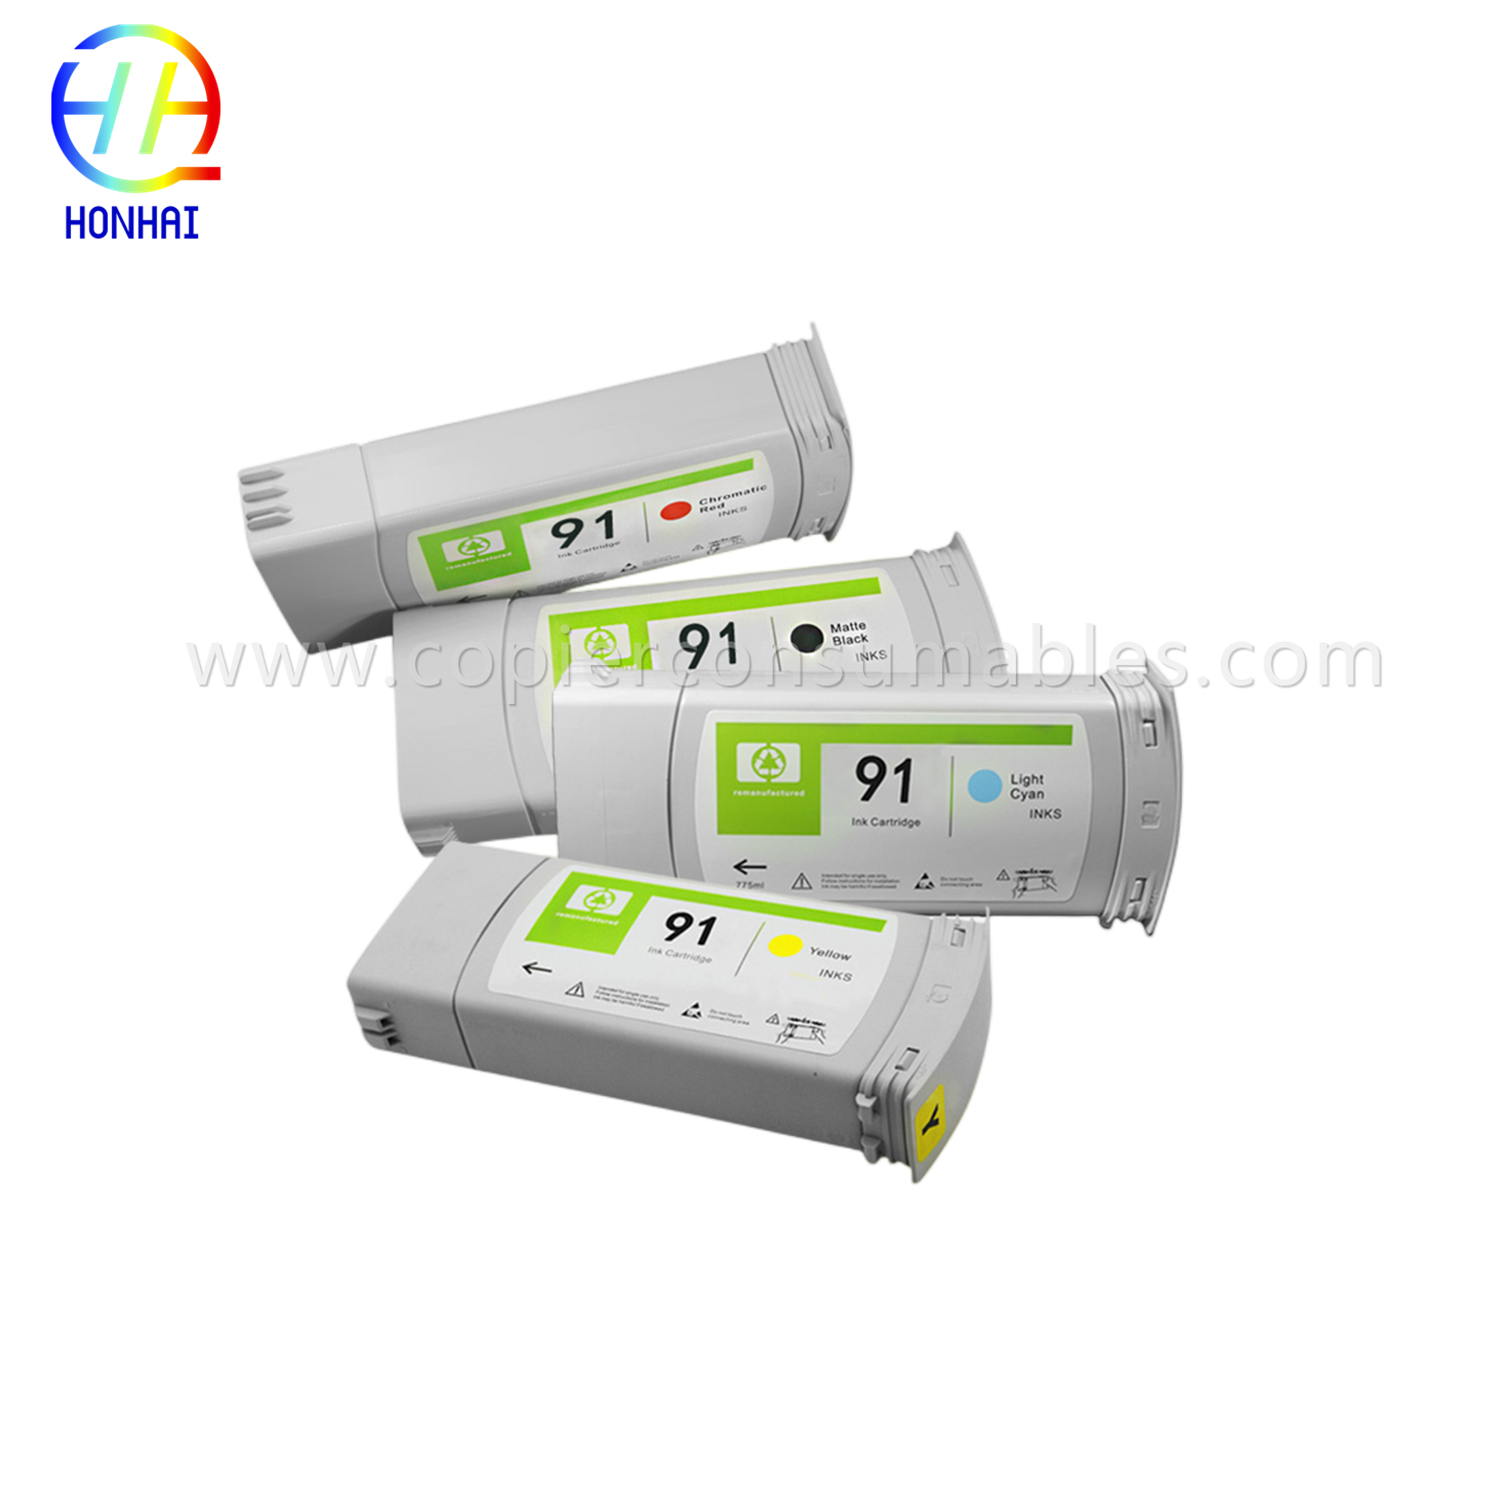 New Genuine Ink Cartridge for HP Designjet Z6100 (91 C9464A C9469A C9471 C9518) (1)